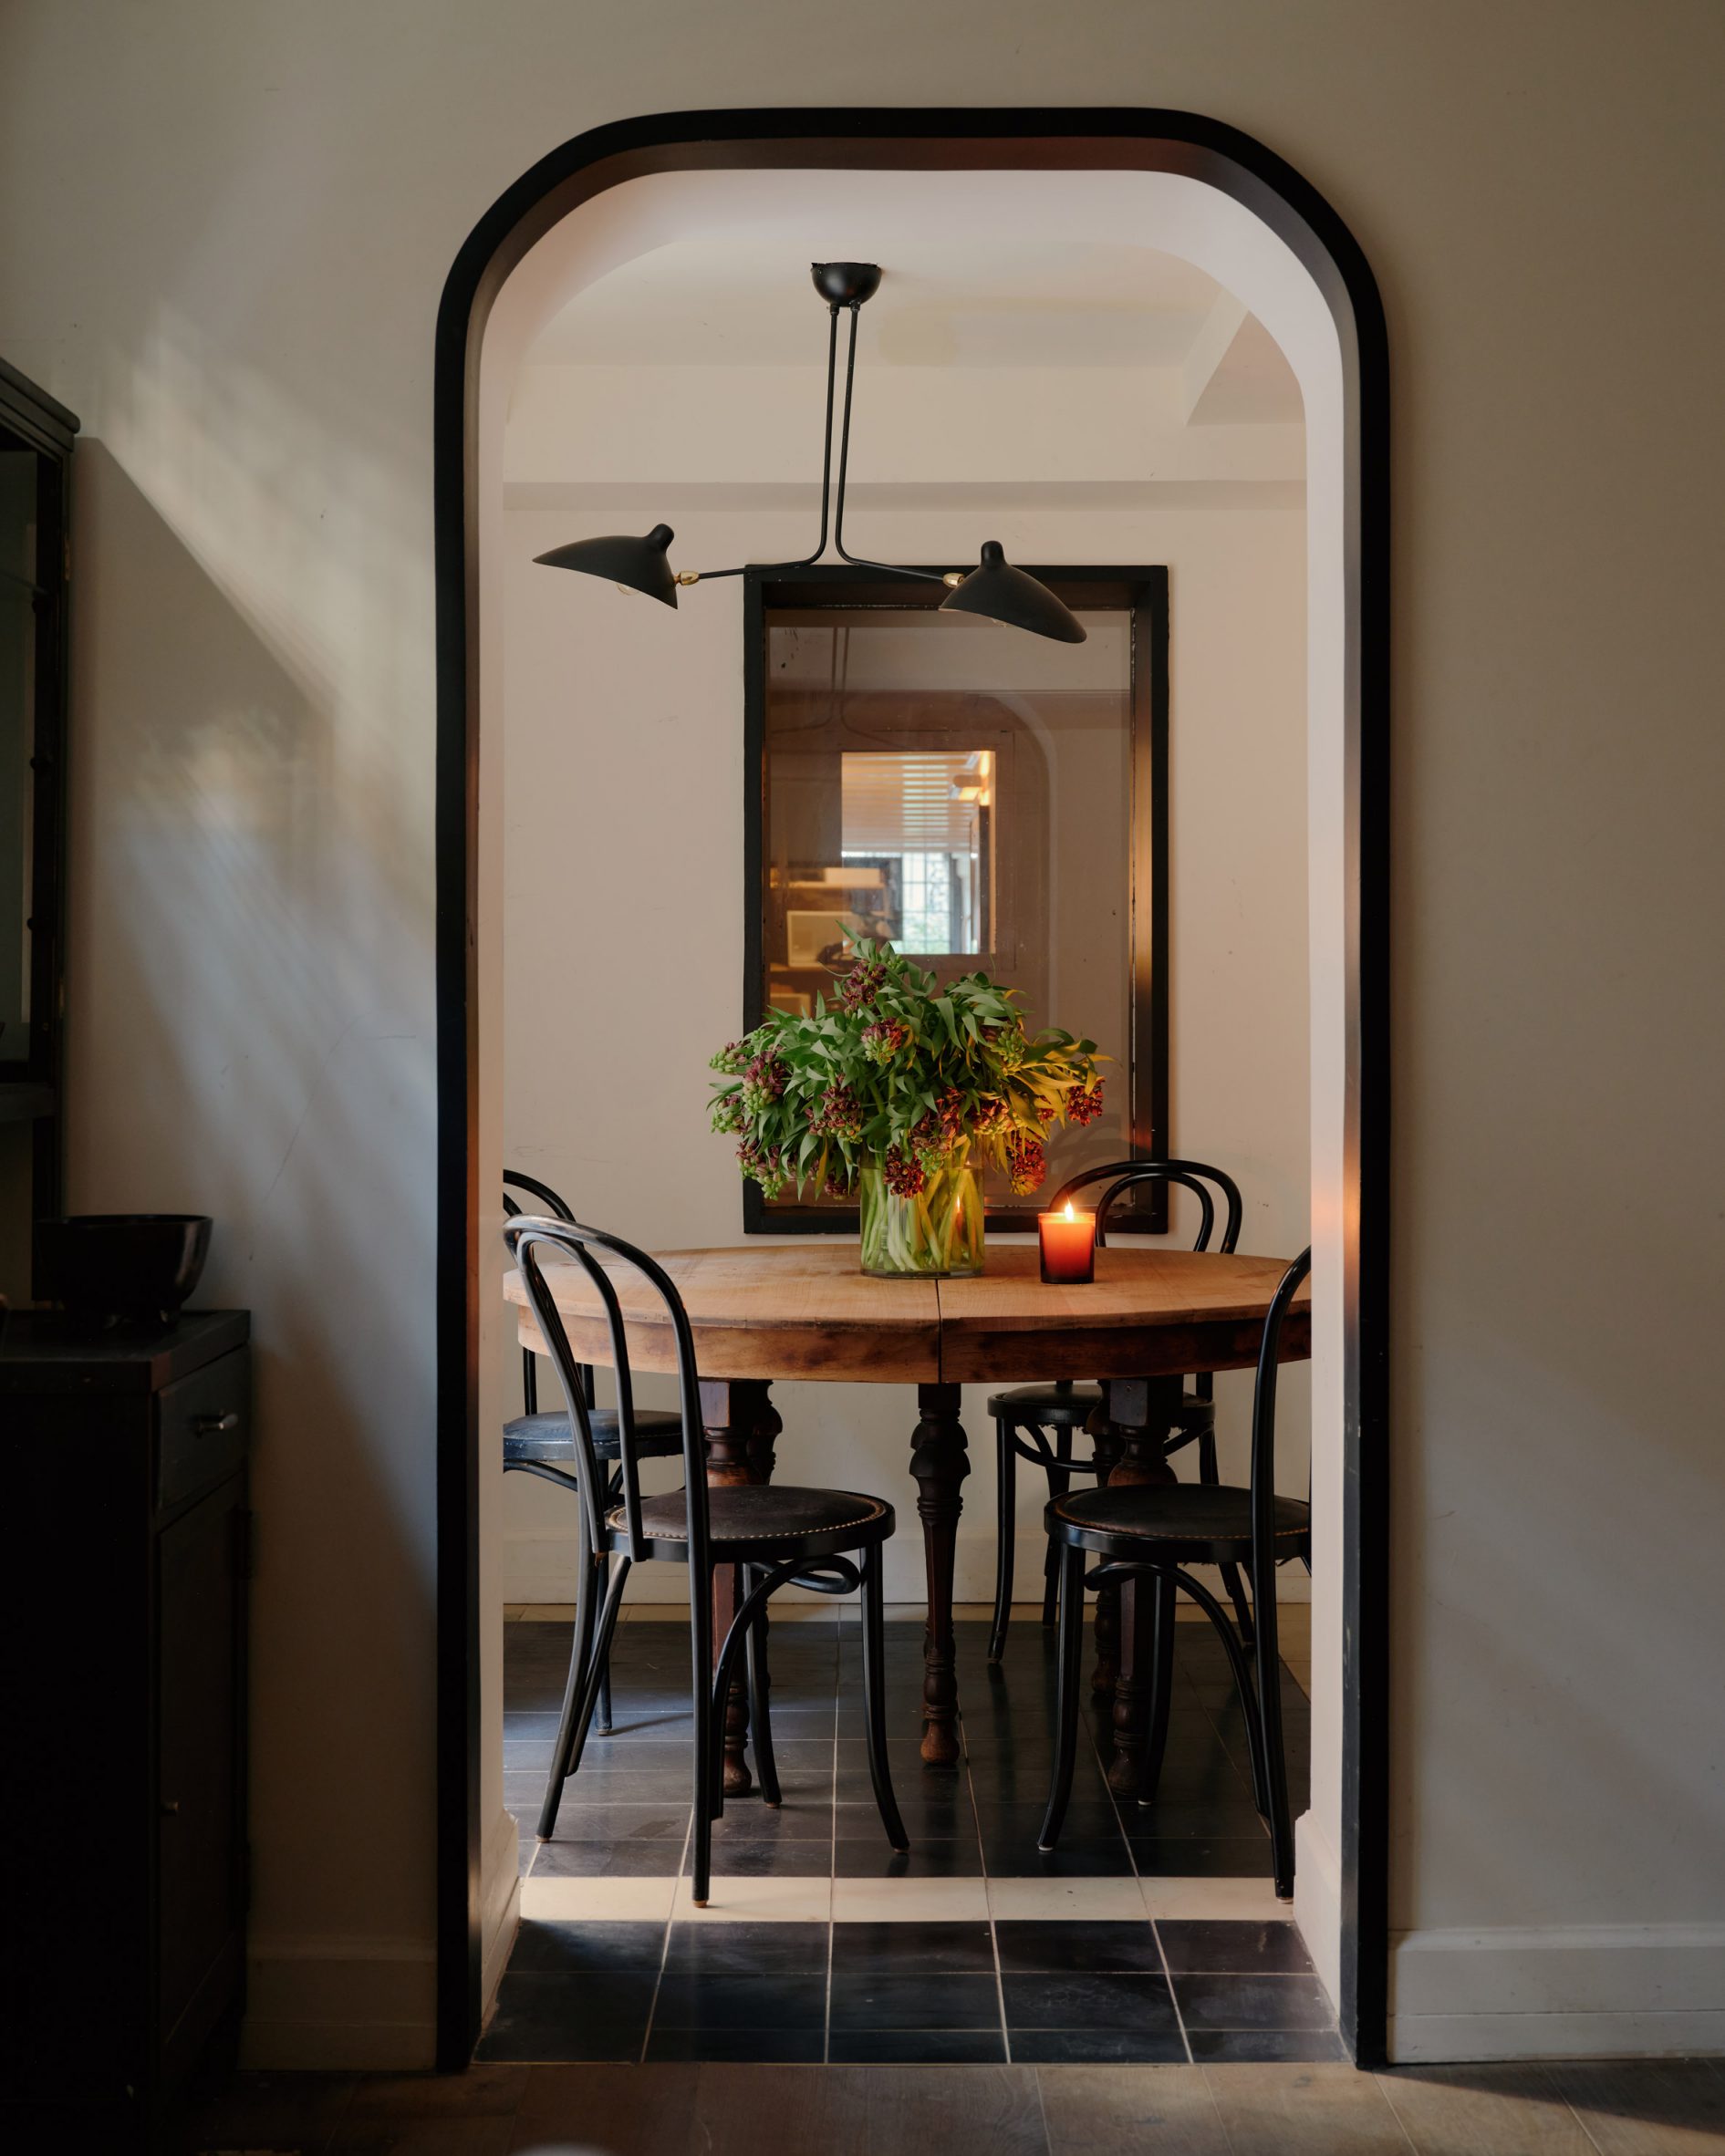 A dining table within a niche, viewed through a mahogany trimmed arch